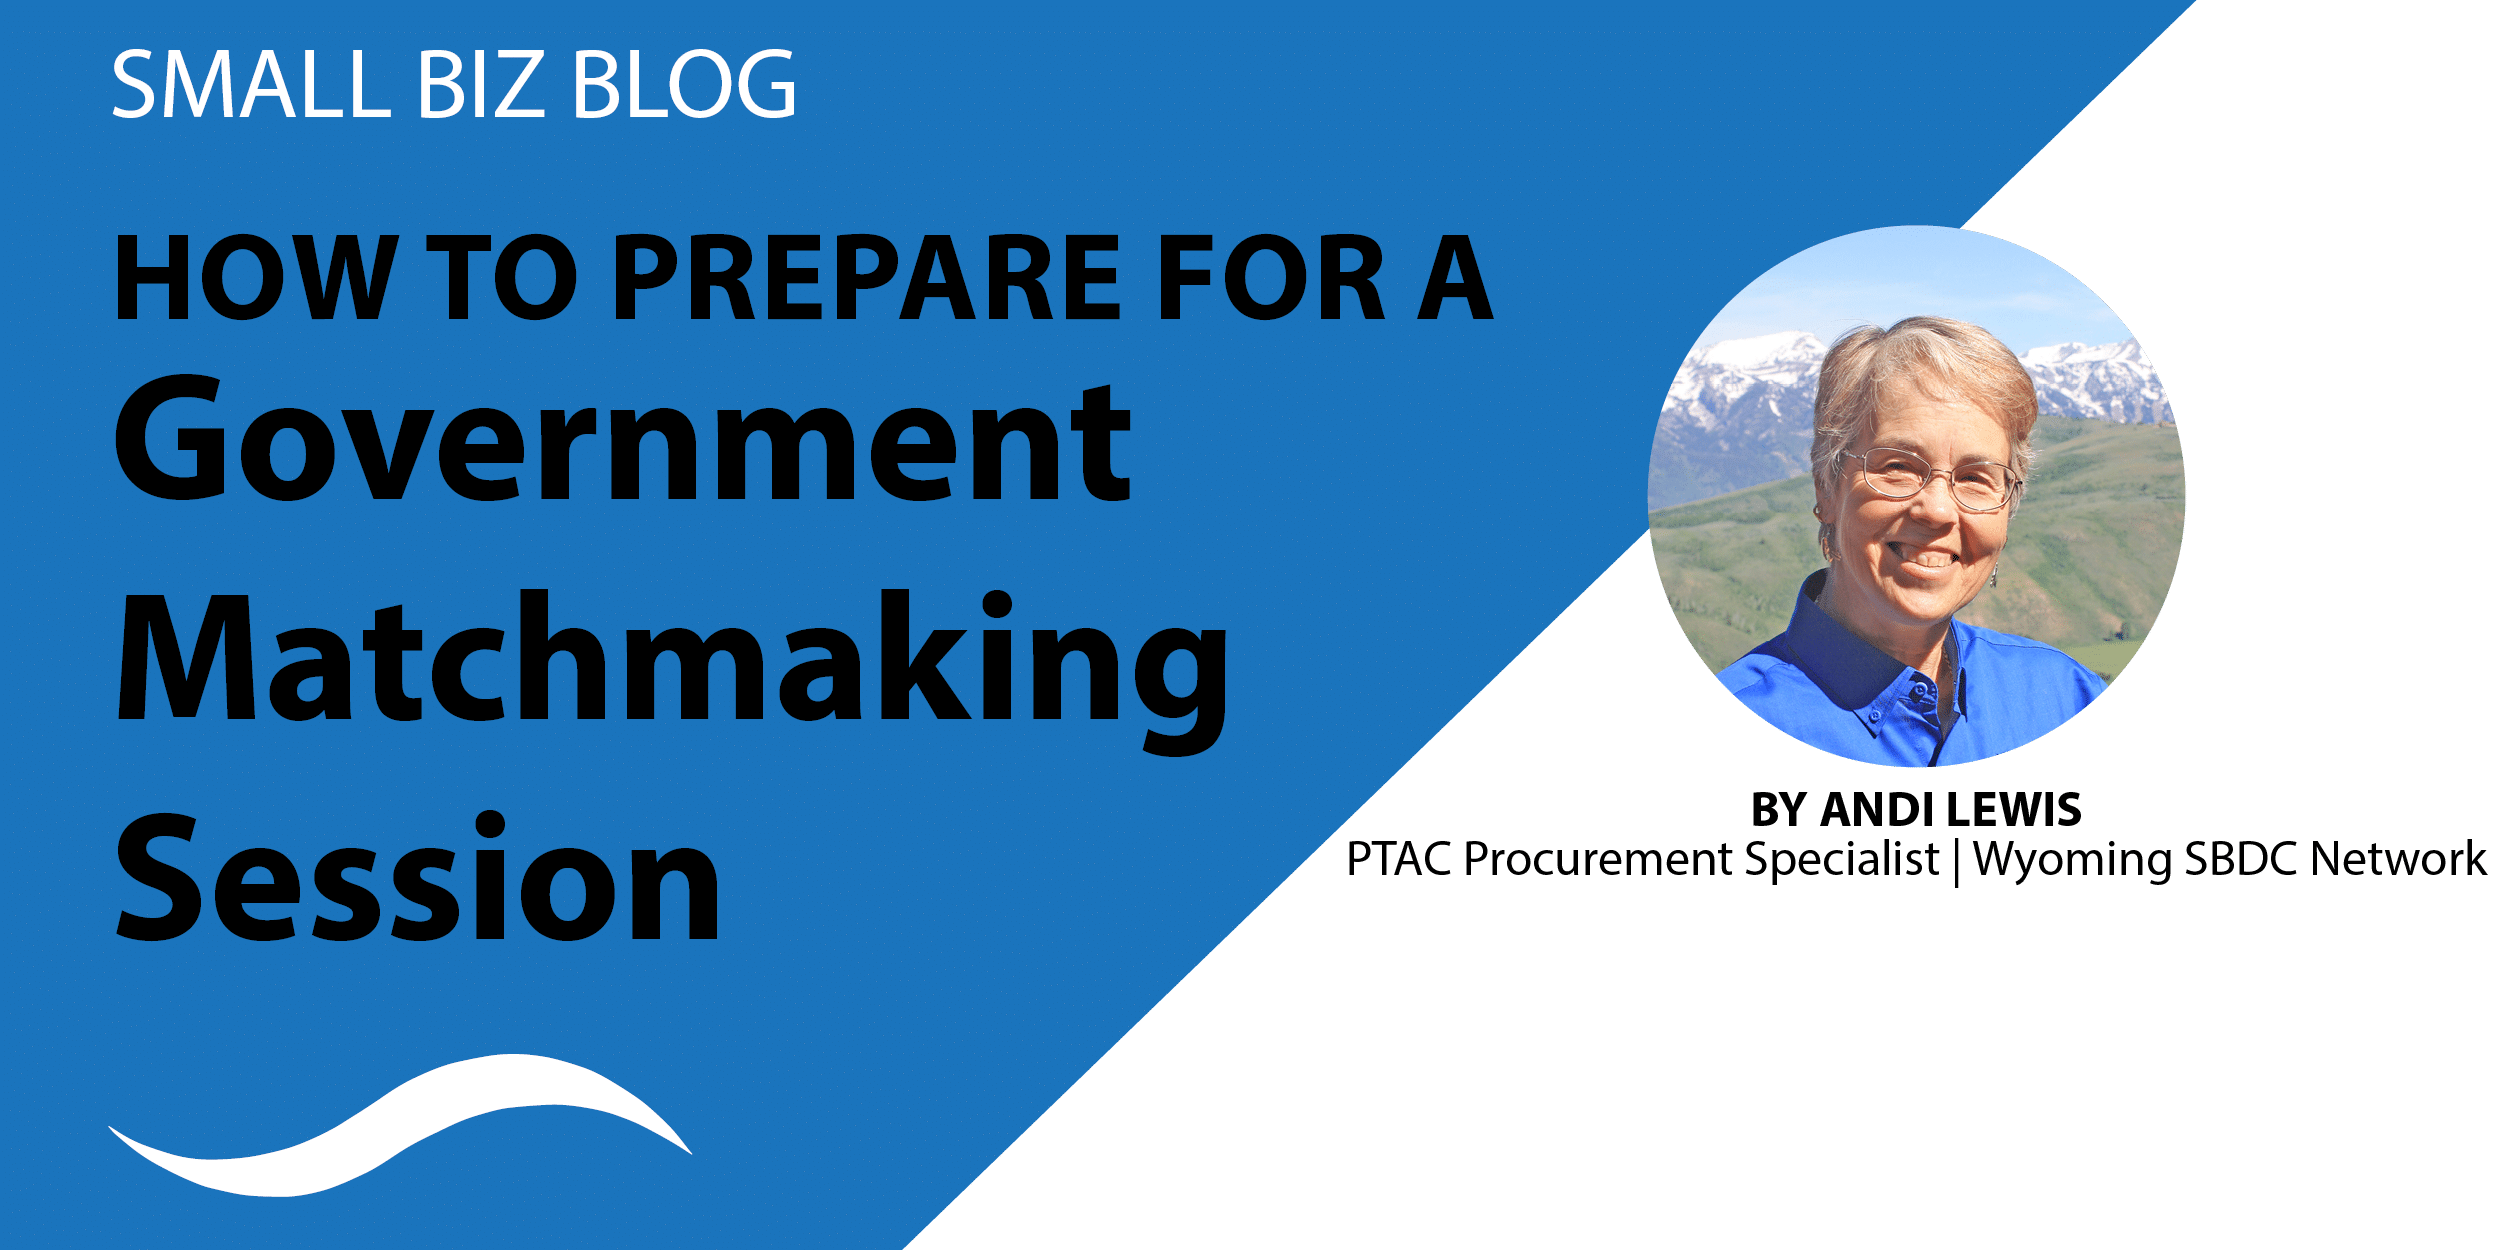 How to Prepare for a Government Matchmaking Session